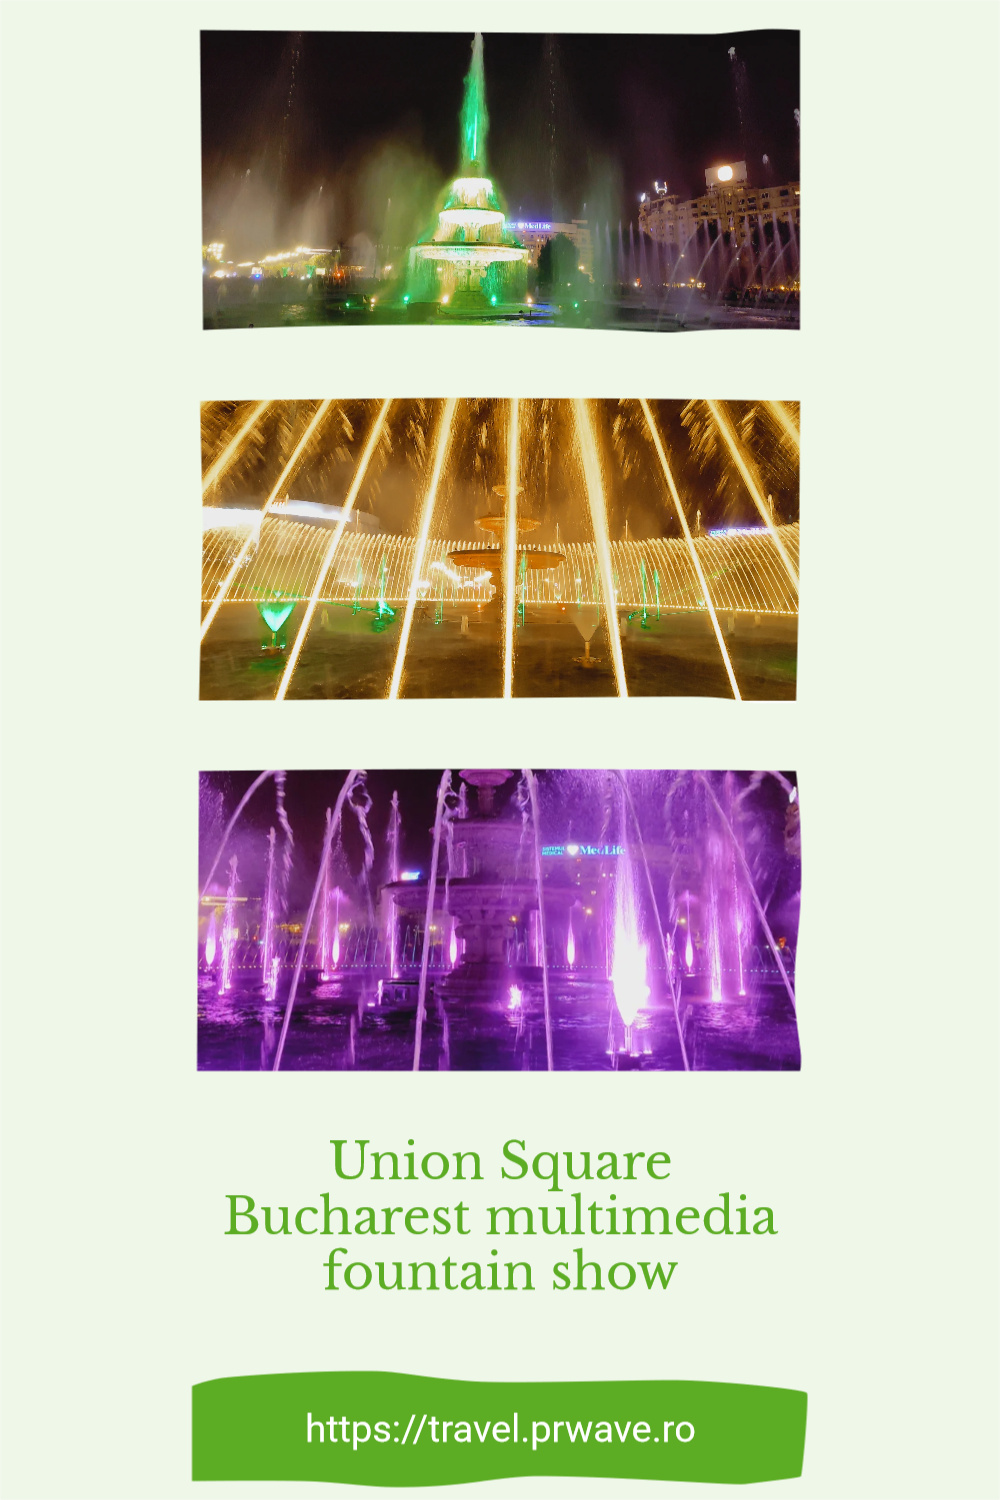 Union Square Bucharest fountain show: everything you need to know about Piata Unirii multimedia fountain show (videos included) #fountainshow #magicalshow #singingfountainshow #magicalfountainshow #bucharestfountains #bucharestfountainsshow